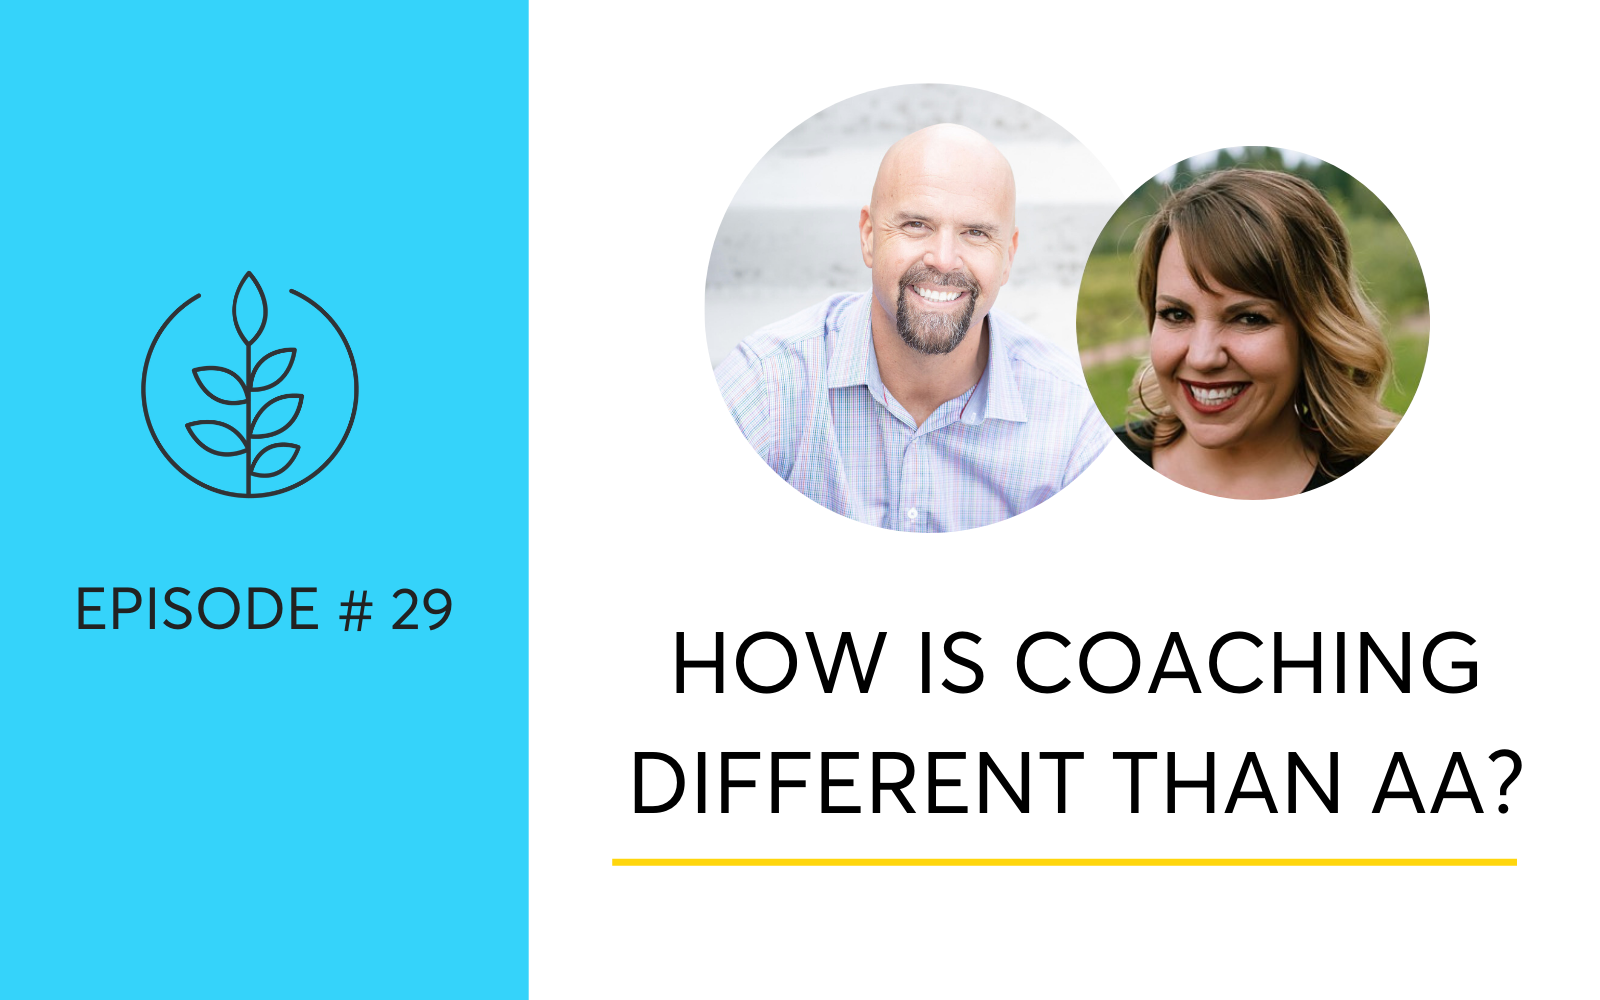 How Is Coaching Different Than AA?